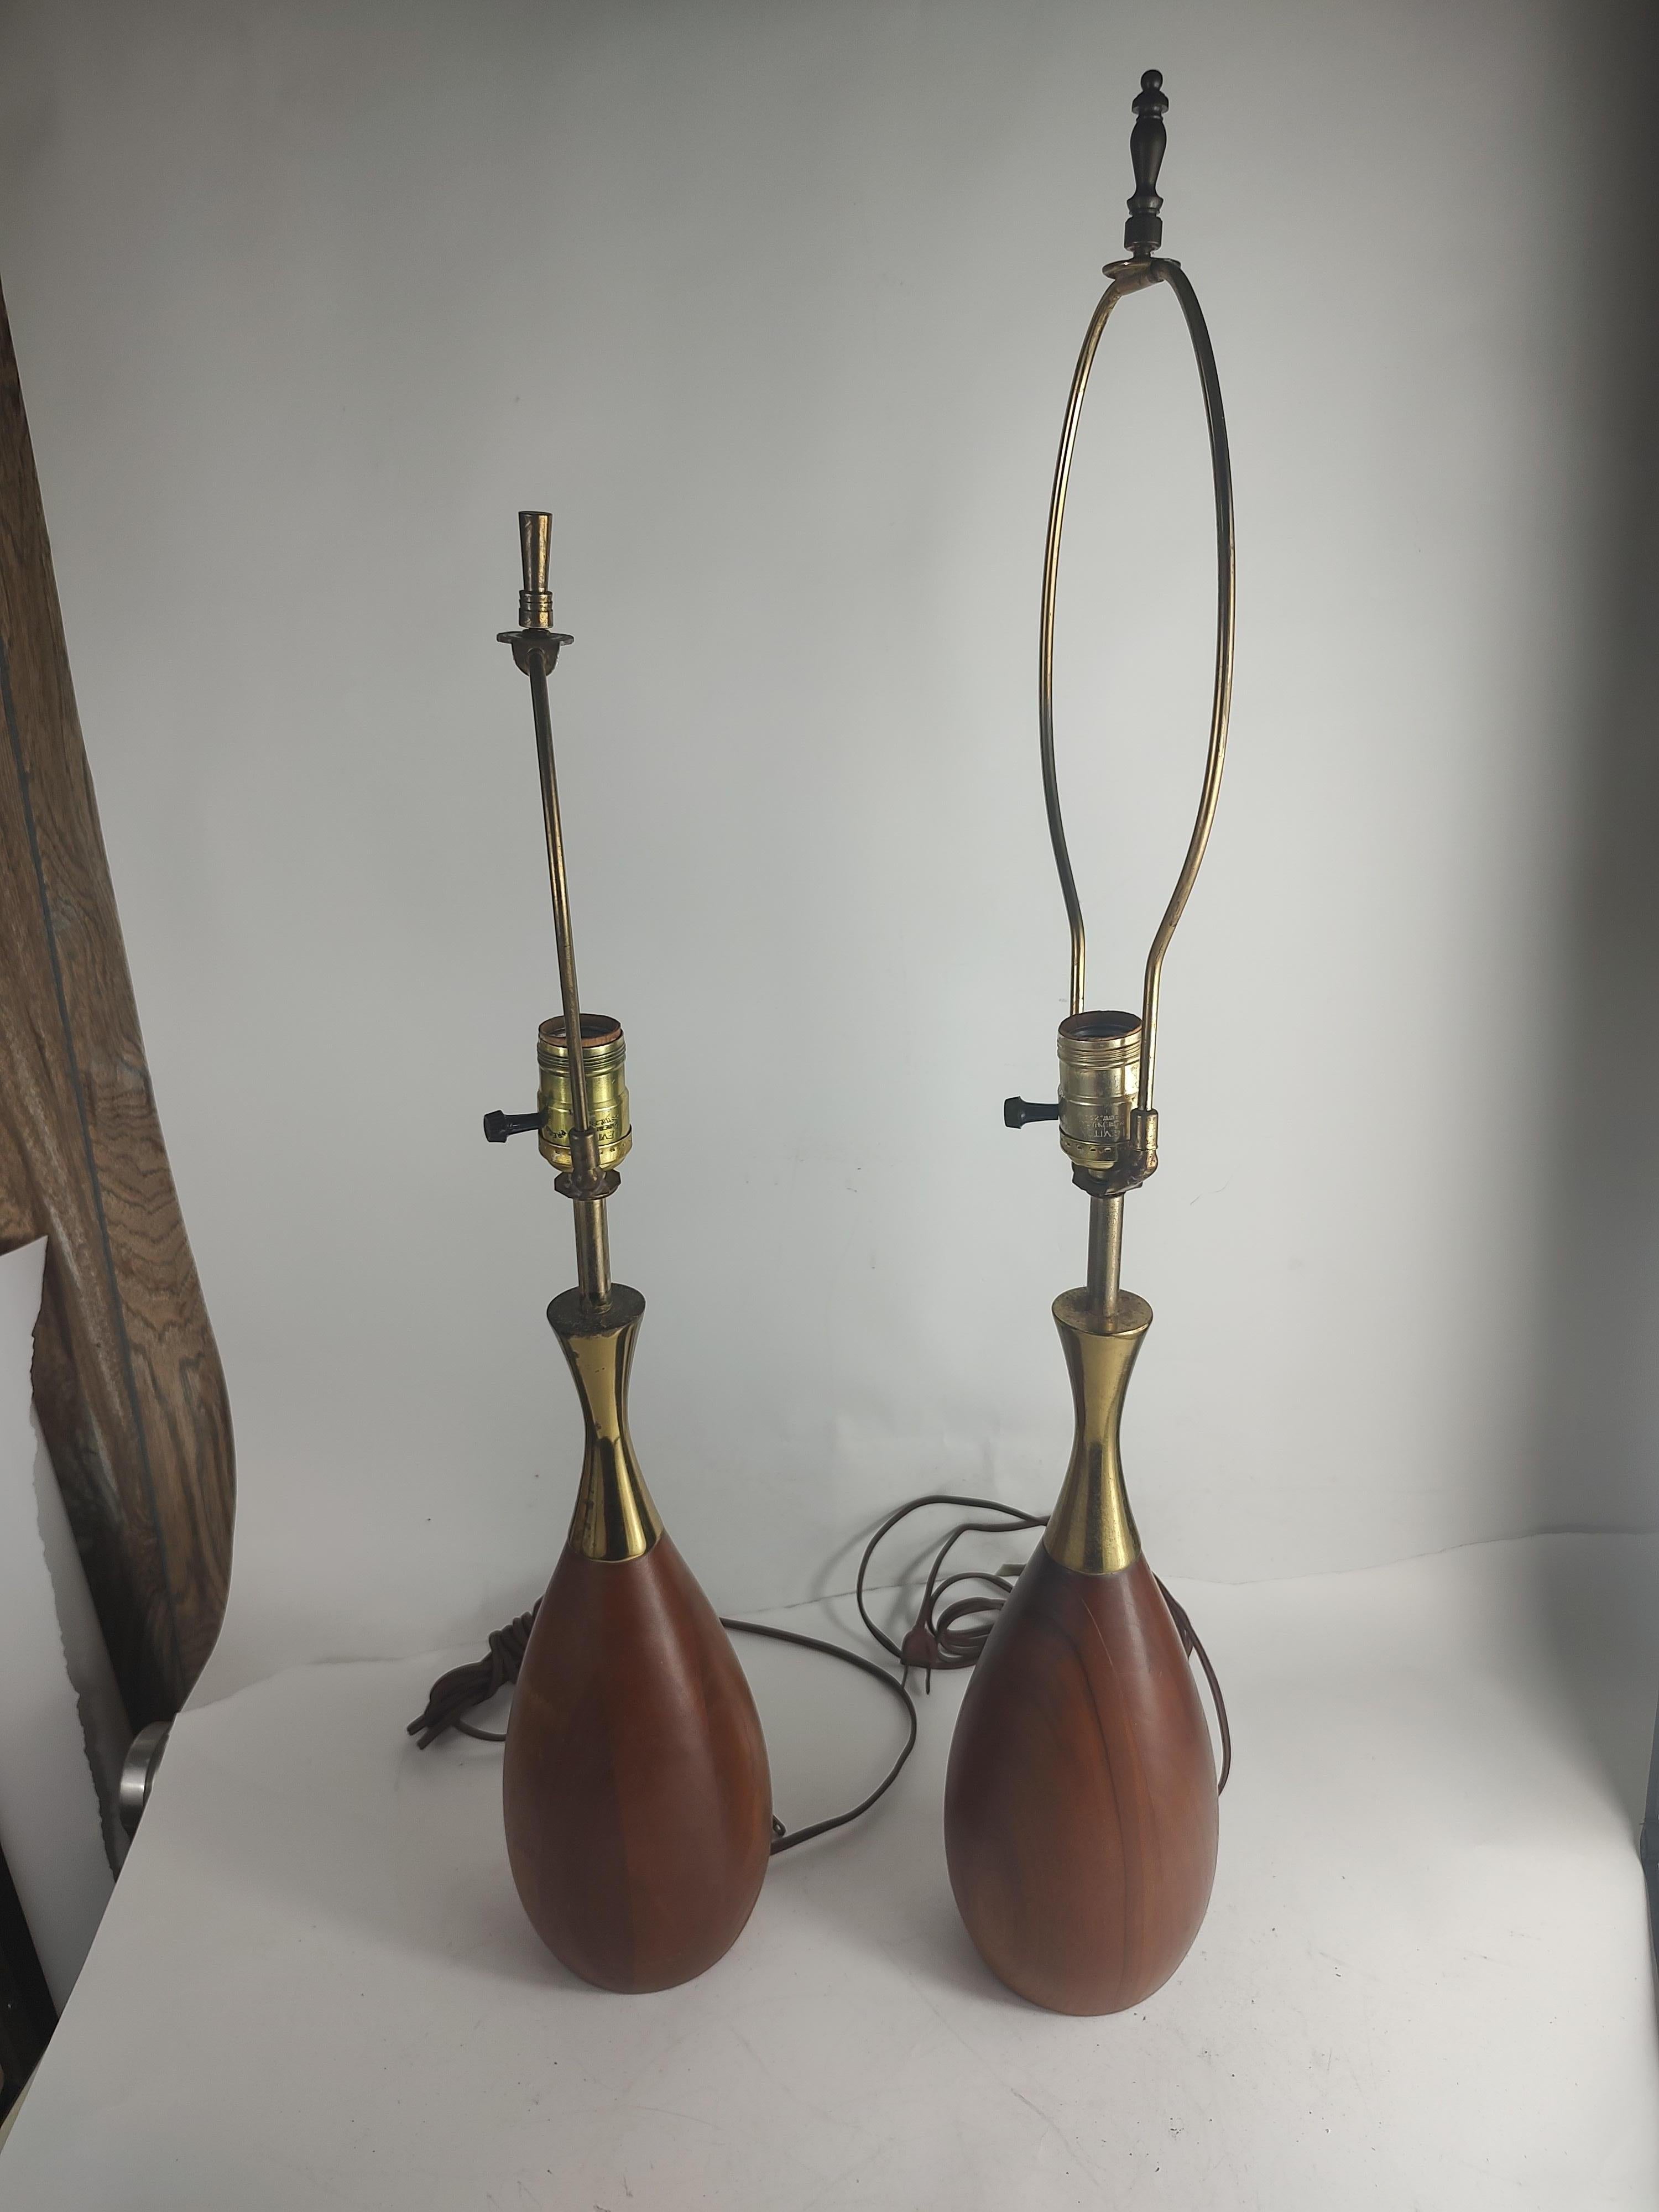 Mid-20th Century Mid-Century Modern Walnut & Brass Table Lamps Bowling Pin Form Tony Paul   For Sale